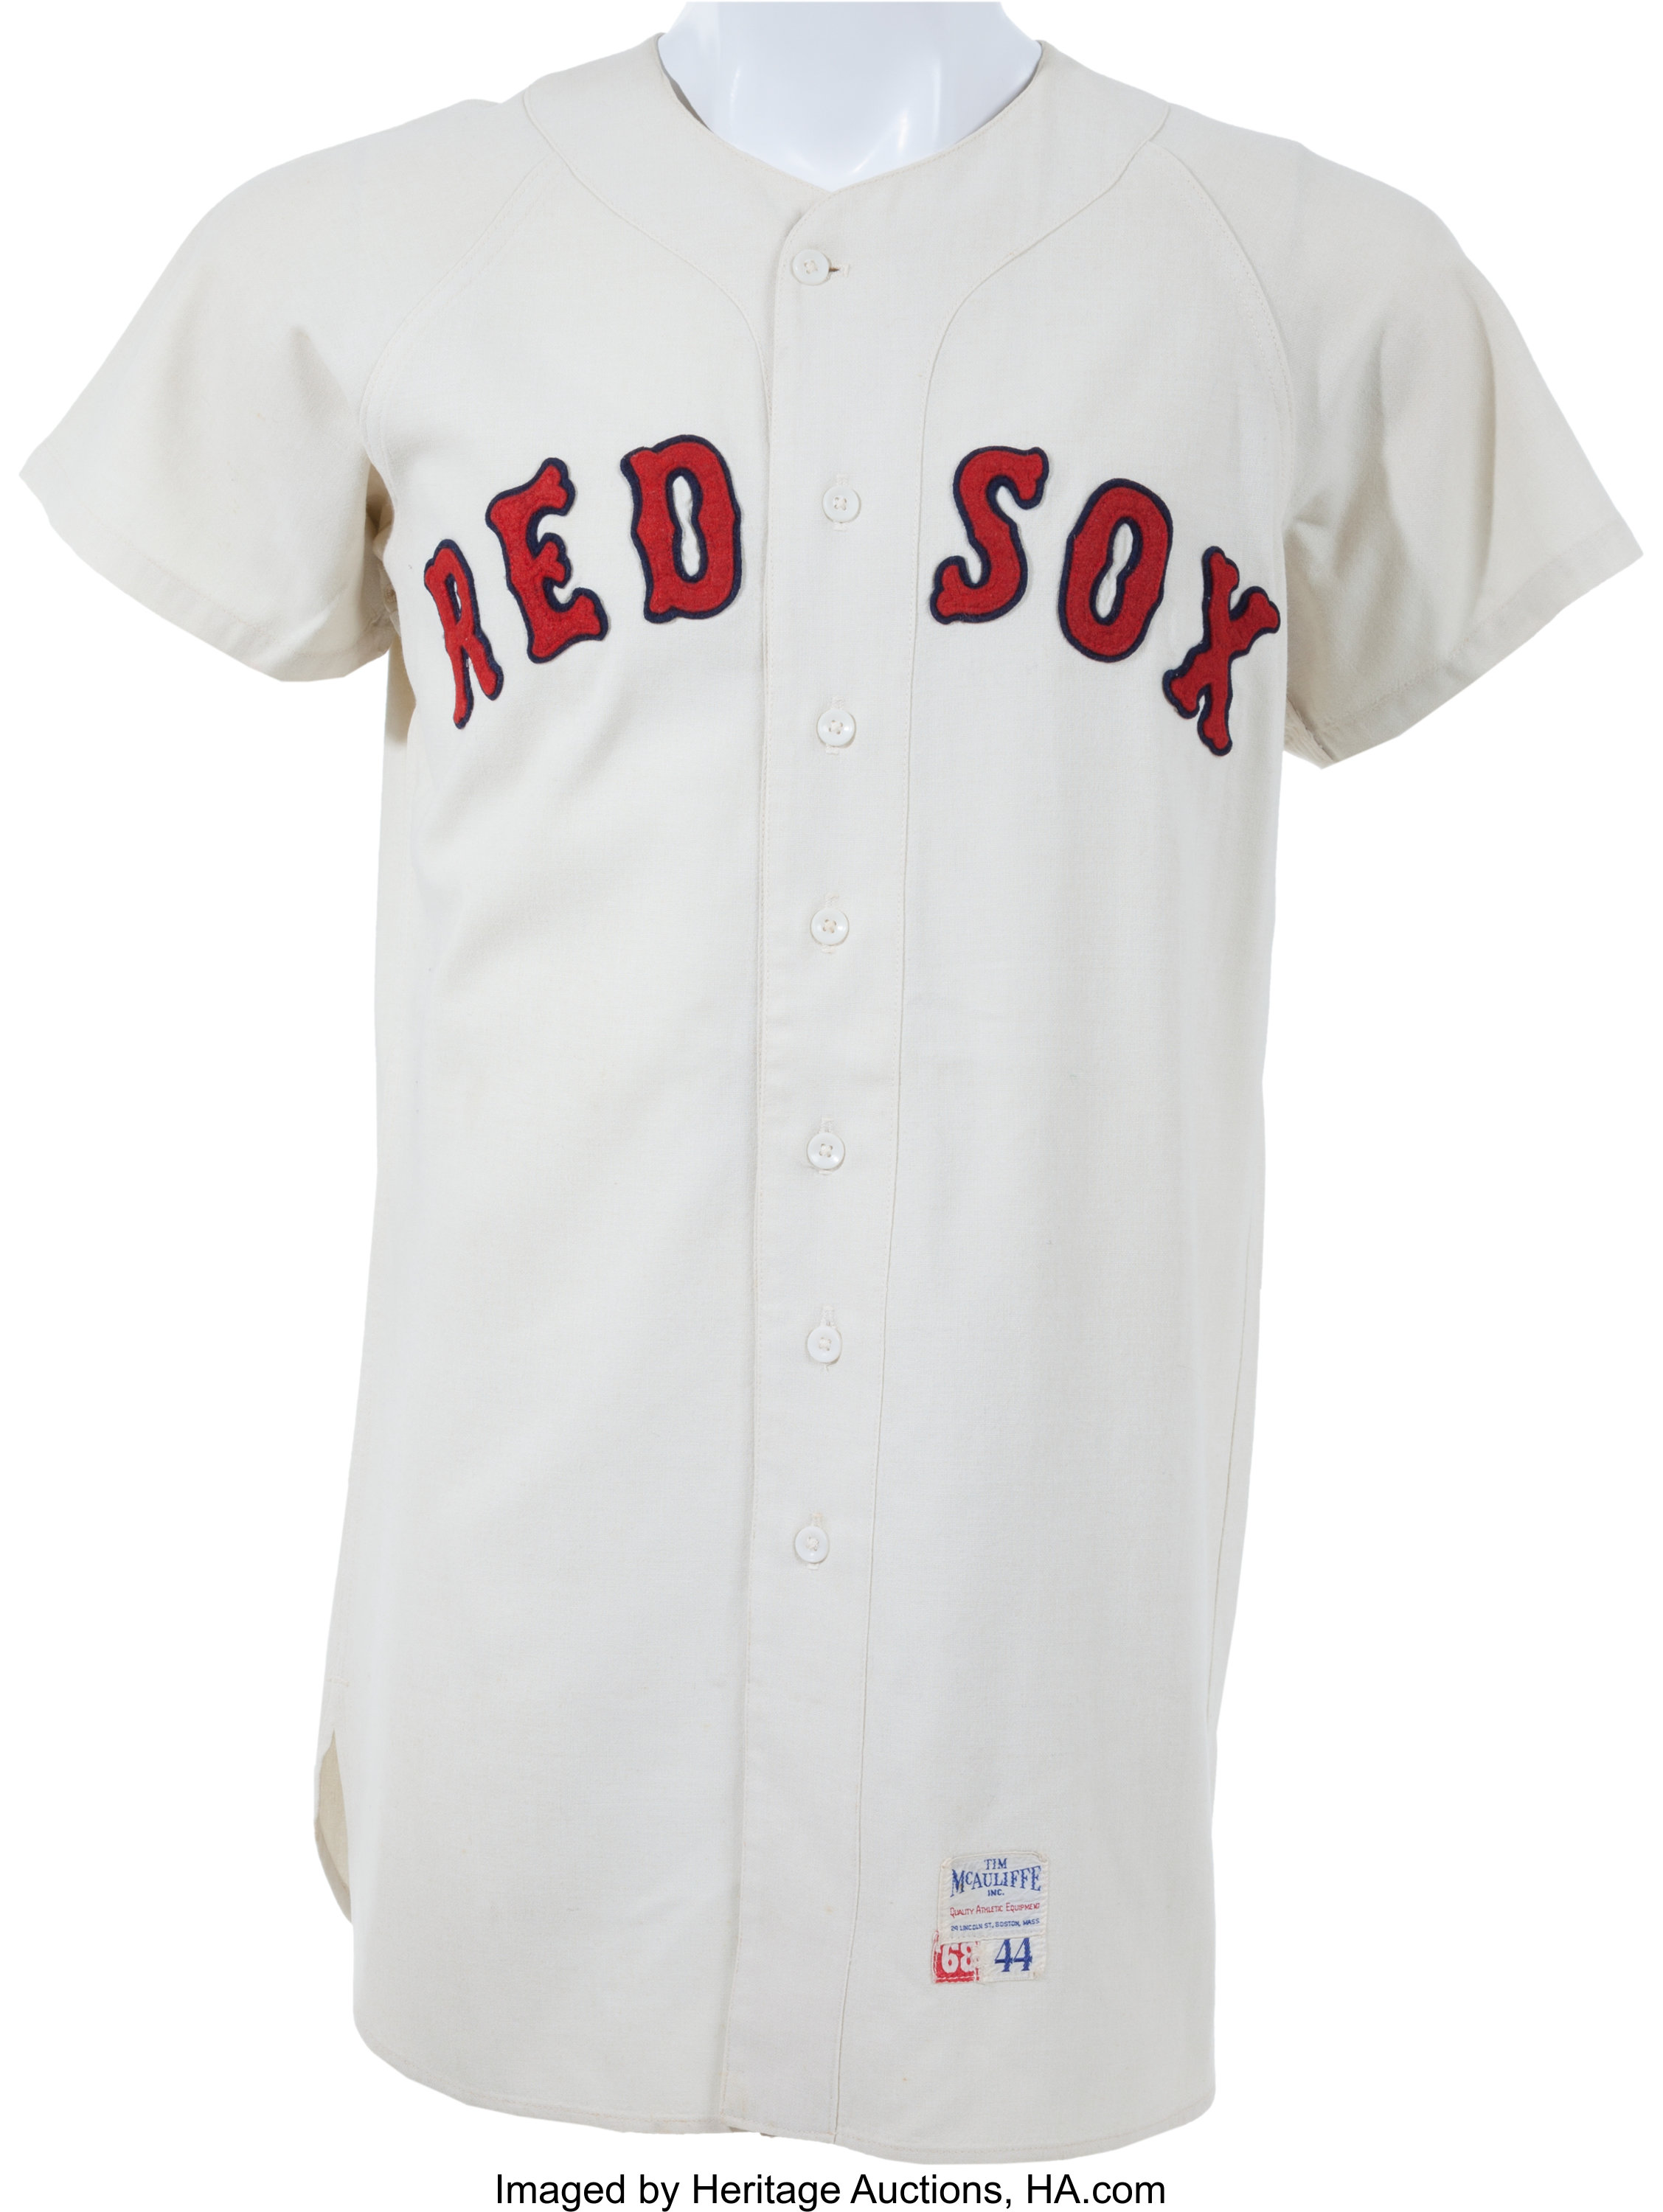 boston red sox game jersey